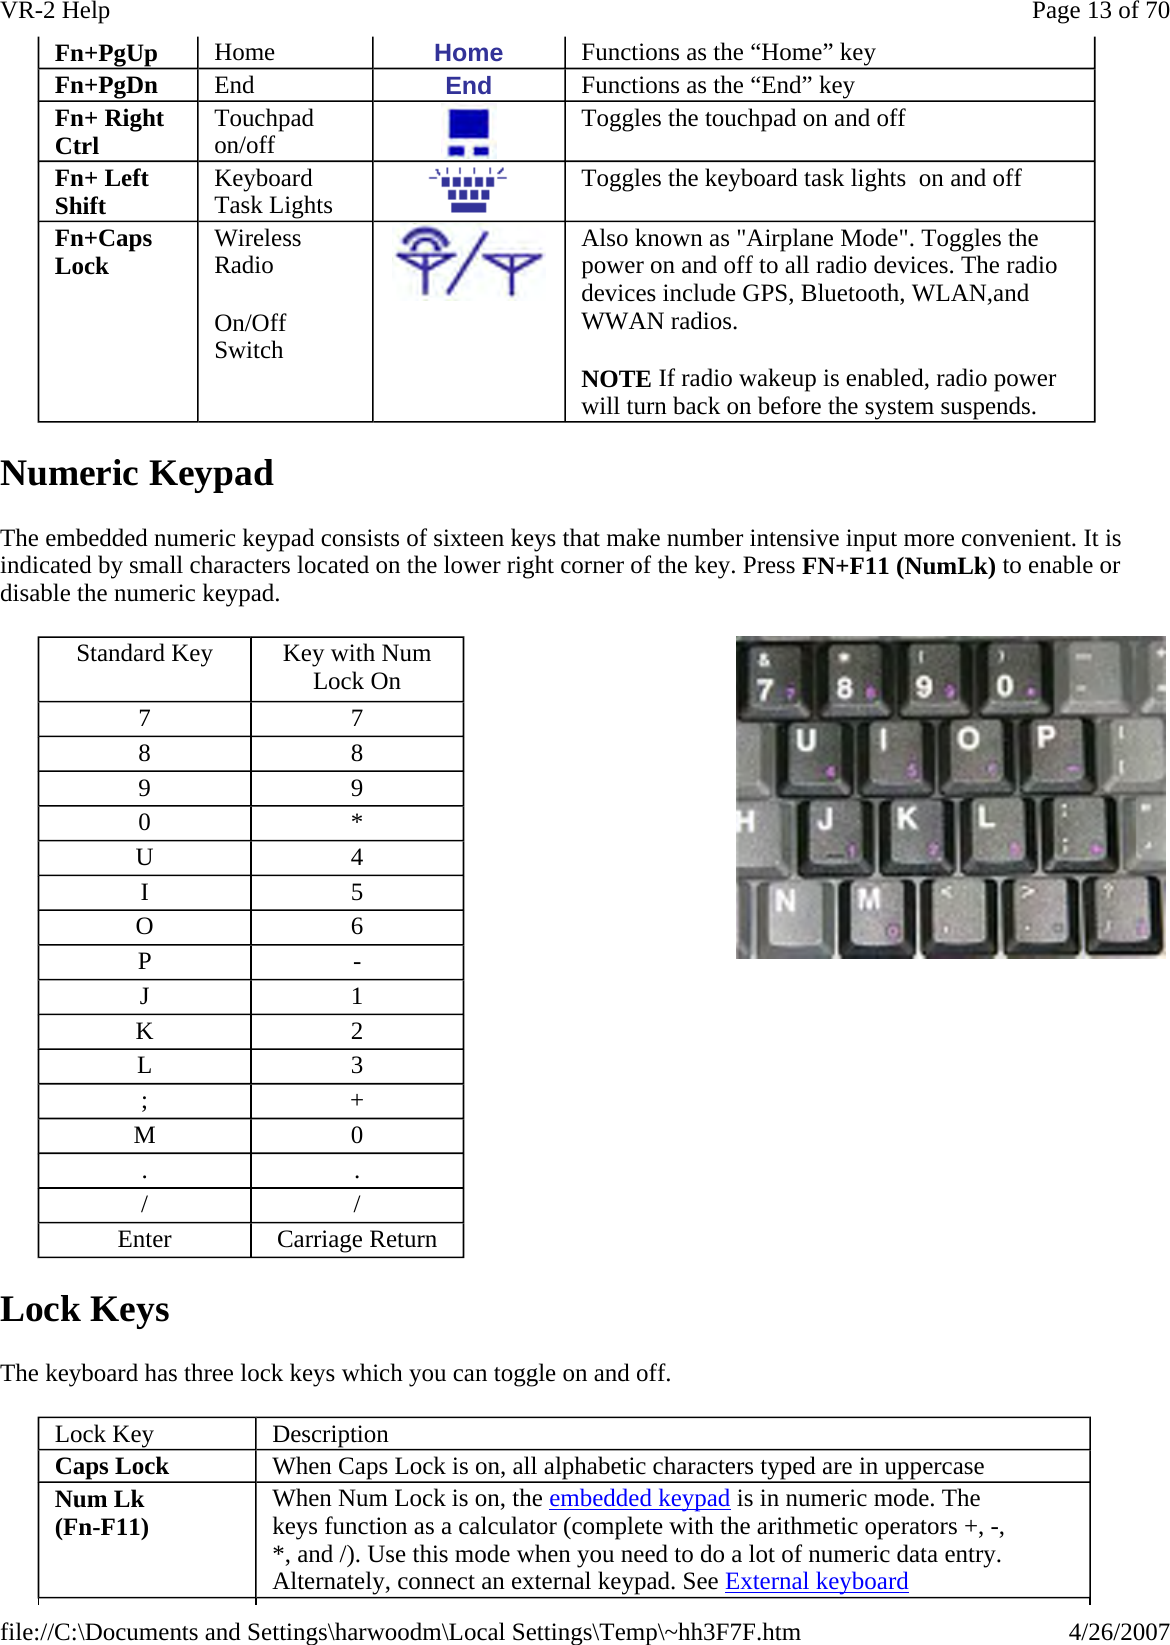 Numeric Keypad The embedded numeric keypad consists of sixteen keys that make number intensive input more convenient. It is indicated by small characters located on the lower right corner of the key. Press FN+F11 (NumLk) to enable or disable the numeric keypad.    Lock Keys The keyboard has three lock keys which you can toggle on and off. Fn+PgUp  Home  Home  Functions as the “Home” key Fn+PgDn  End  End  Functions as the “End” key Fn+ Right Ctrl  Touchpad on/off  Toggles the touchpad on and off Fn+ Left Shift  Keyboard Task Lights  Toggles the keyboard task lights  on and off Fn+Caps Lock  Wireless Radio  On/Off Switch  Also known as &quot;Airplane Mode&quot;. Toggles the power on and off to all radio devices. The radio devices include GPS, Bluetooth, WLAN,and WWAN radios. NOTE If radio wakeup is enabled, radio power will turn back on before the system suspends. Standard Key  Key with Num Lock On 7  7 8  8 9  9 0  * U  4 I  5 O  6 P  - J  1 K  2 L  3 ;  + M  0 .  . /  / Enter  Carriage Return  Lock Key  Description Caps Lock  When Caps Lock is on, all alphabetic characters typed are in uppercase Num Lk  (Fn-F11)  When Num Lock is on, the embedded keypad is in numeric mode. The keys function as a calculator (complete with the arithmetic operators +, -, *, and /). Use this mode when you need to do a lot of numeric data entry.  Alternately, connect an external keypad. See External keyboard Page 13 of 70VR-2 Help4/26/2007file://C:\Documents and Settings\harwoodm\Local Settings\Temp\~hh3F7F.htm